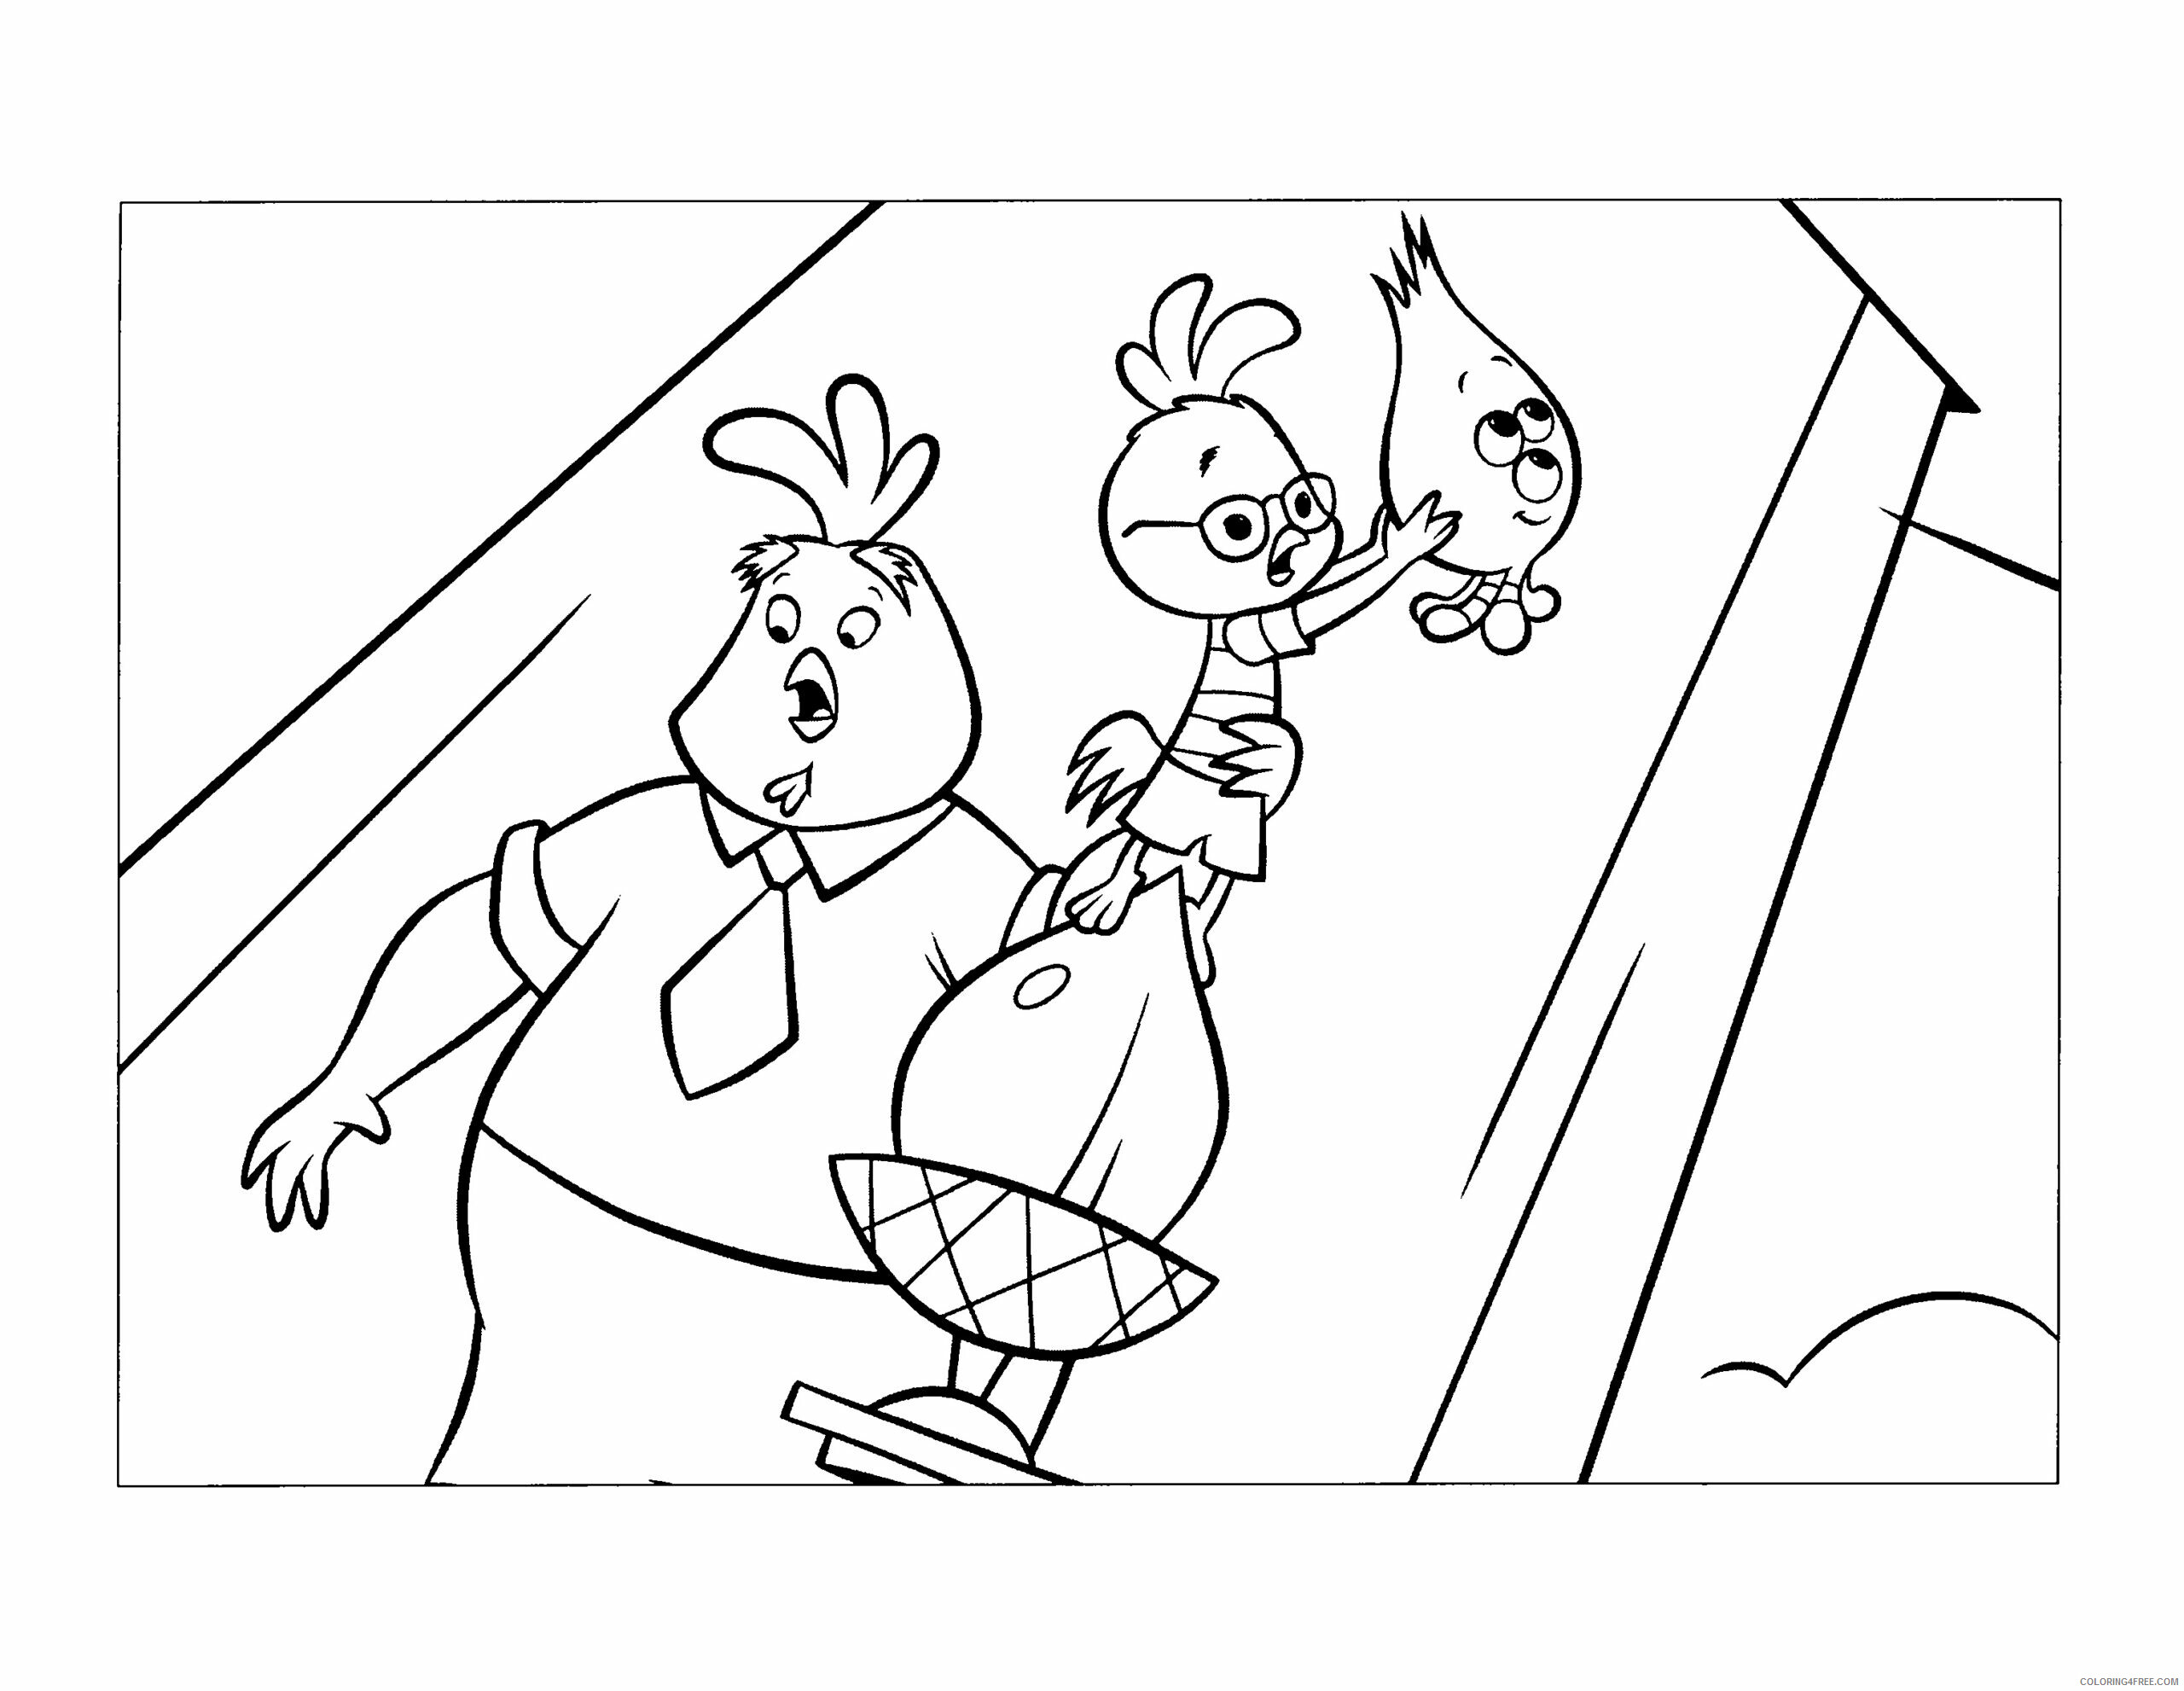 Chicken Little Coloring Pages Tv Film Chicken Little 6 Printable 2020 02093 Coloring4free Coloring4free Com